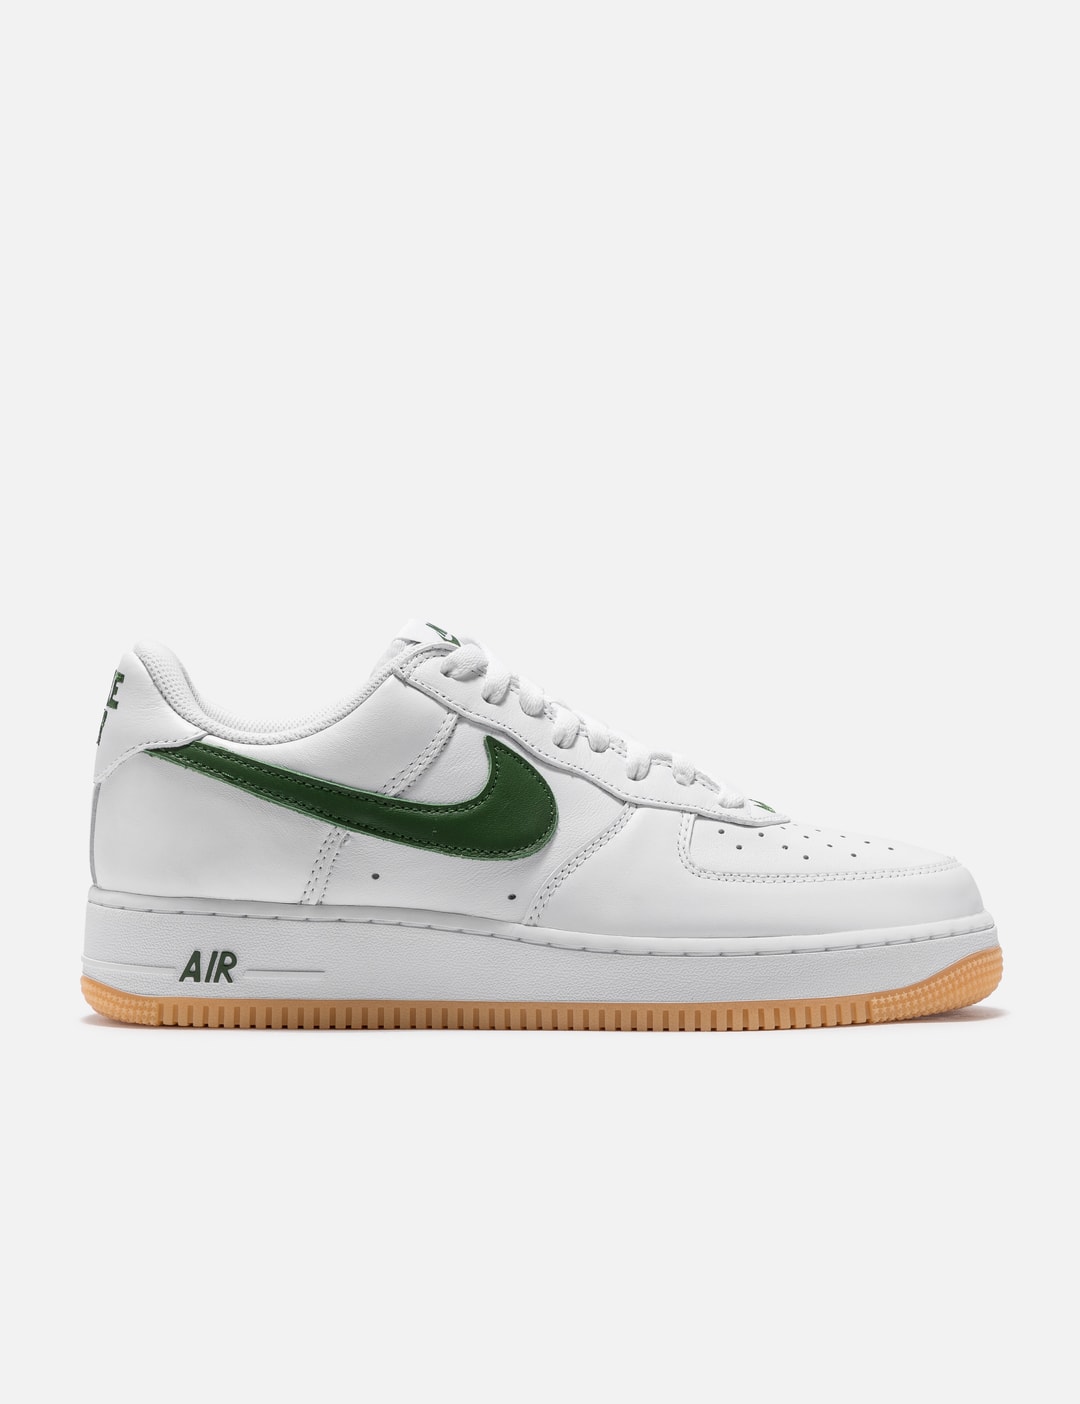 NIKE AIR FORCE 1 LOW BY YOU ID OFF WHITE BLACK YELLOW GUM SZ 11